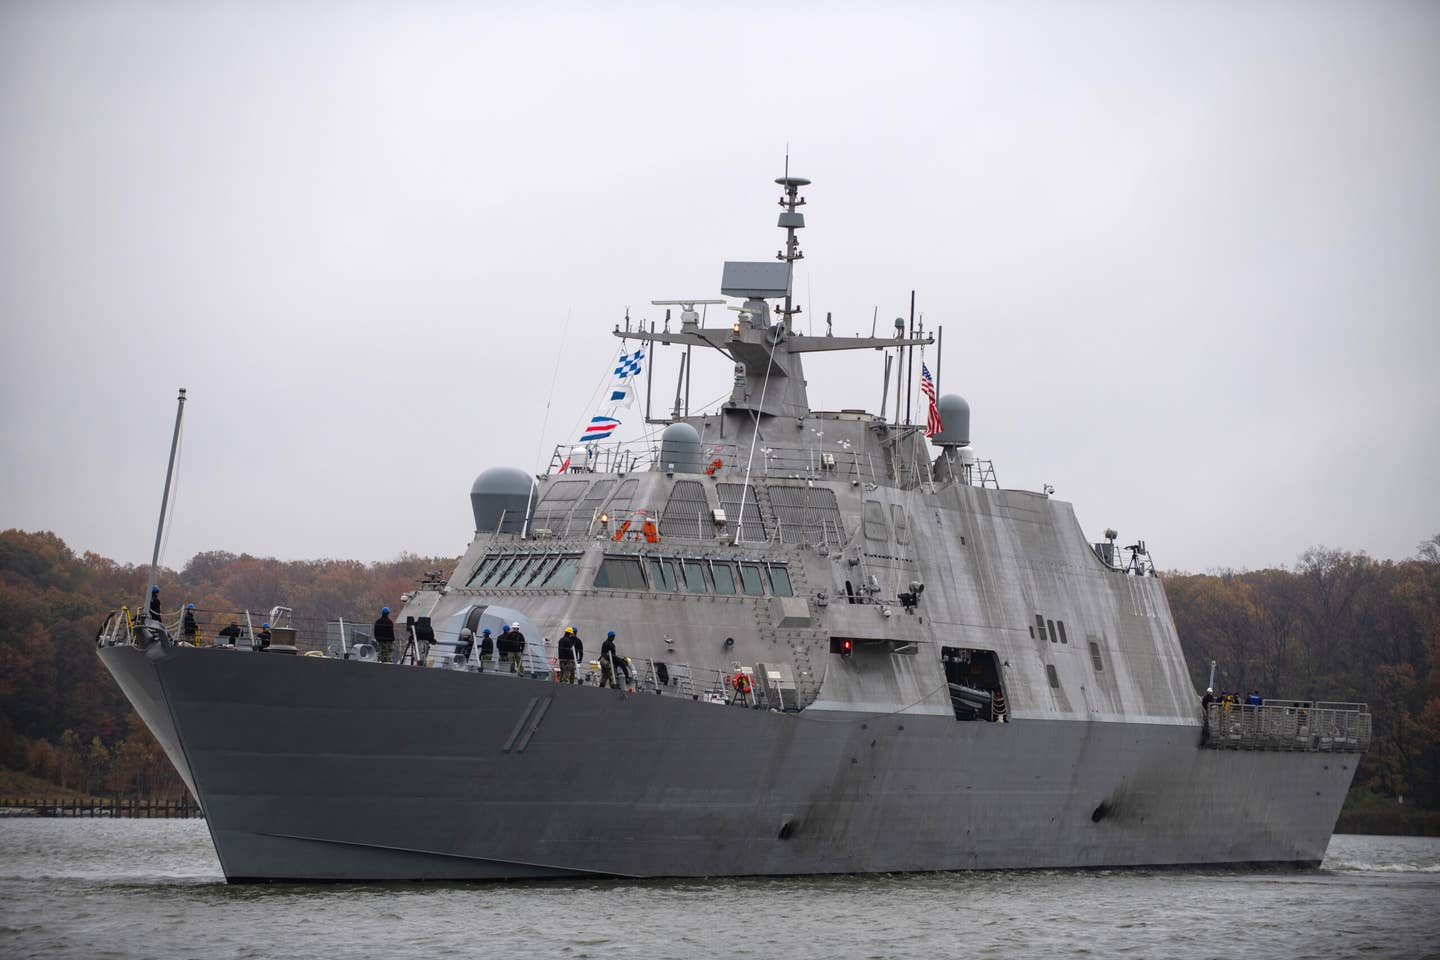 USS <em>Sioux City</em> (LCS 11) transits the Severn River before it arrives at the U.S. Naval Academy, November 13, 2018. <em>U.S. Navy photo by Mass Communication Specialist 2nd Class Nathan Burke.</em>